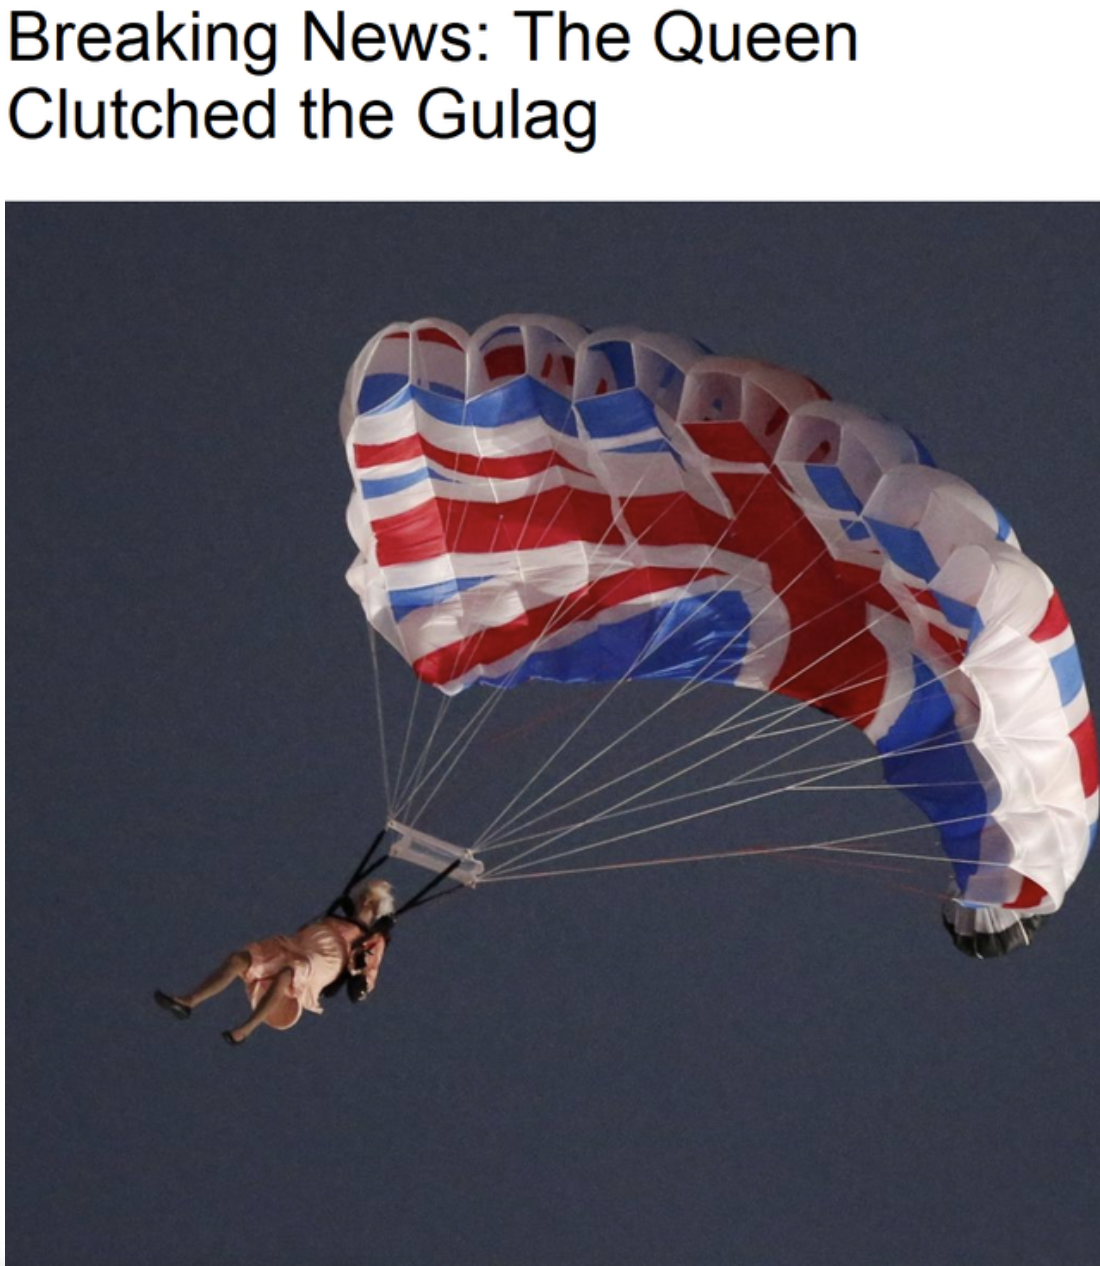 Gaming memes - queen 2012 olympics opening ceremony - Breaking News The Queen Clutched the Gulag